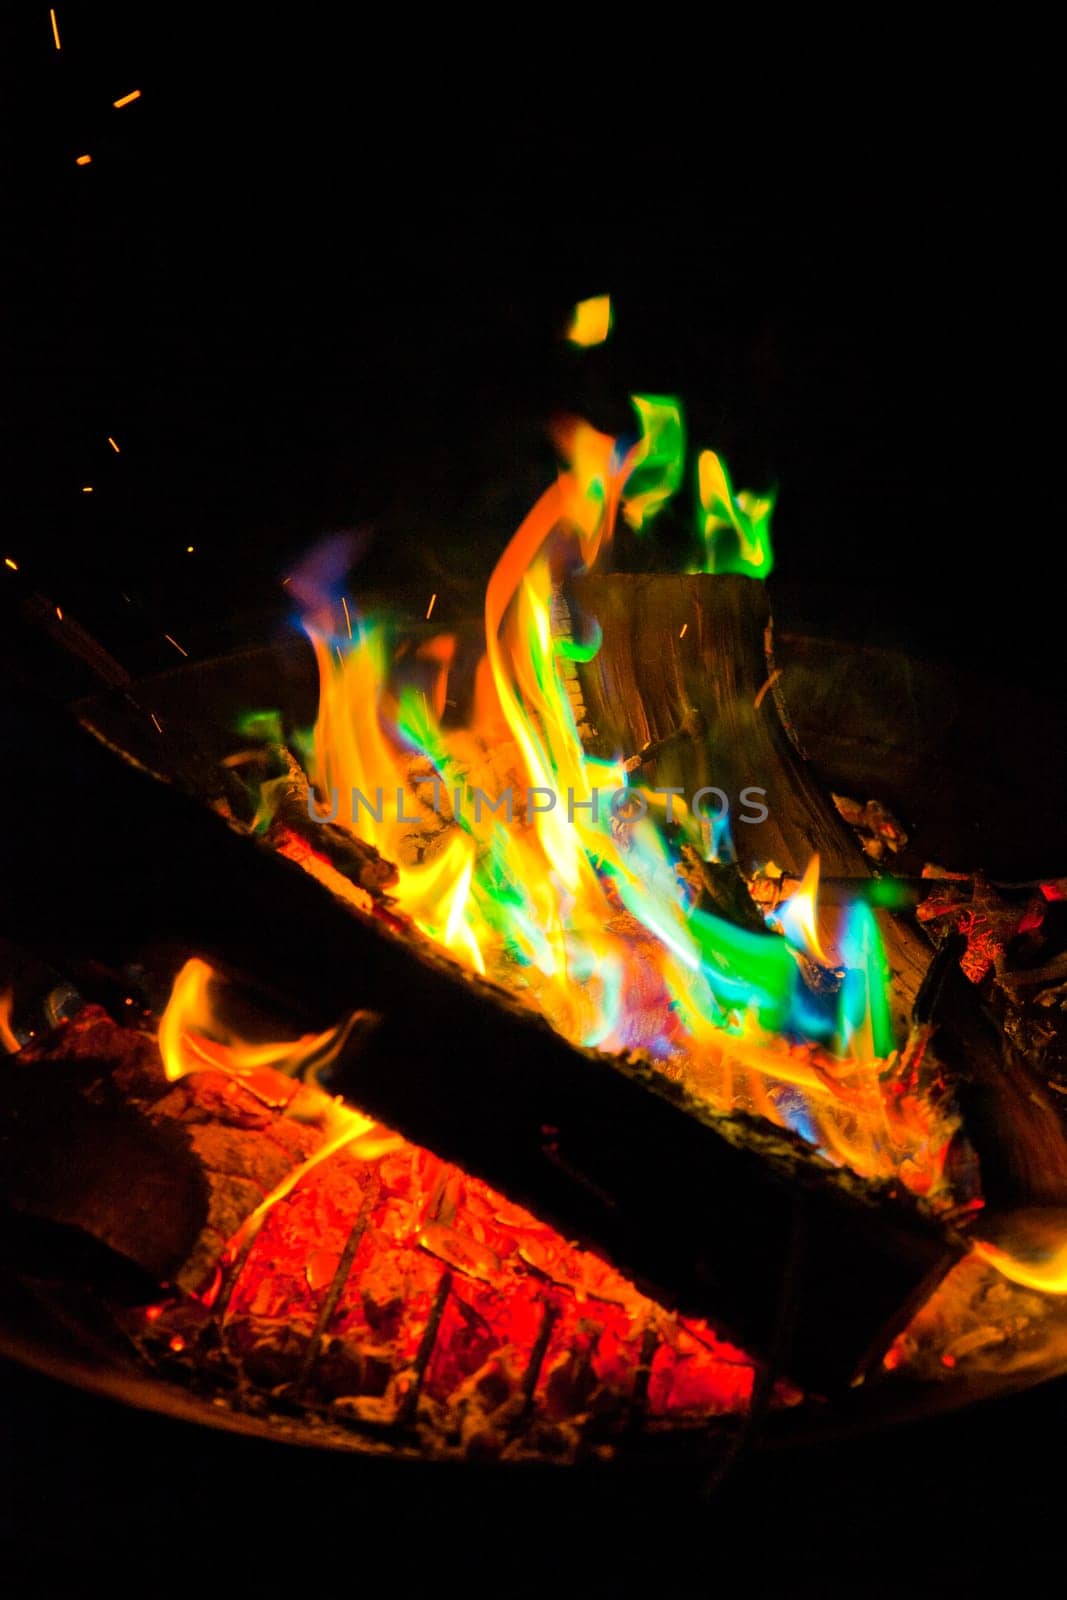 Vibrant and dynamic campfire illuminates the night, with colorful flames flickering in shades of green, blue, orange, and yellow. Sparks dance in the air, adding to the lively atmosphere. Perfect for conveying warmth, energy, and outdoor adventure.